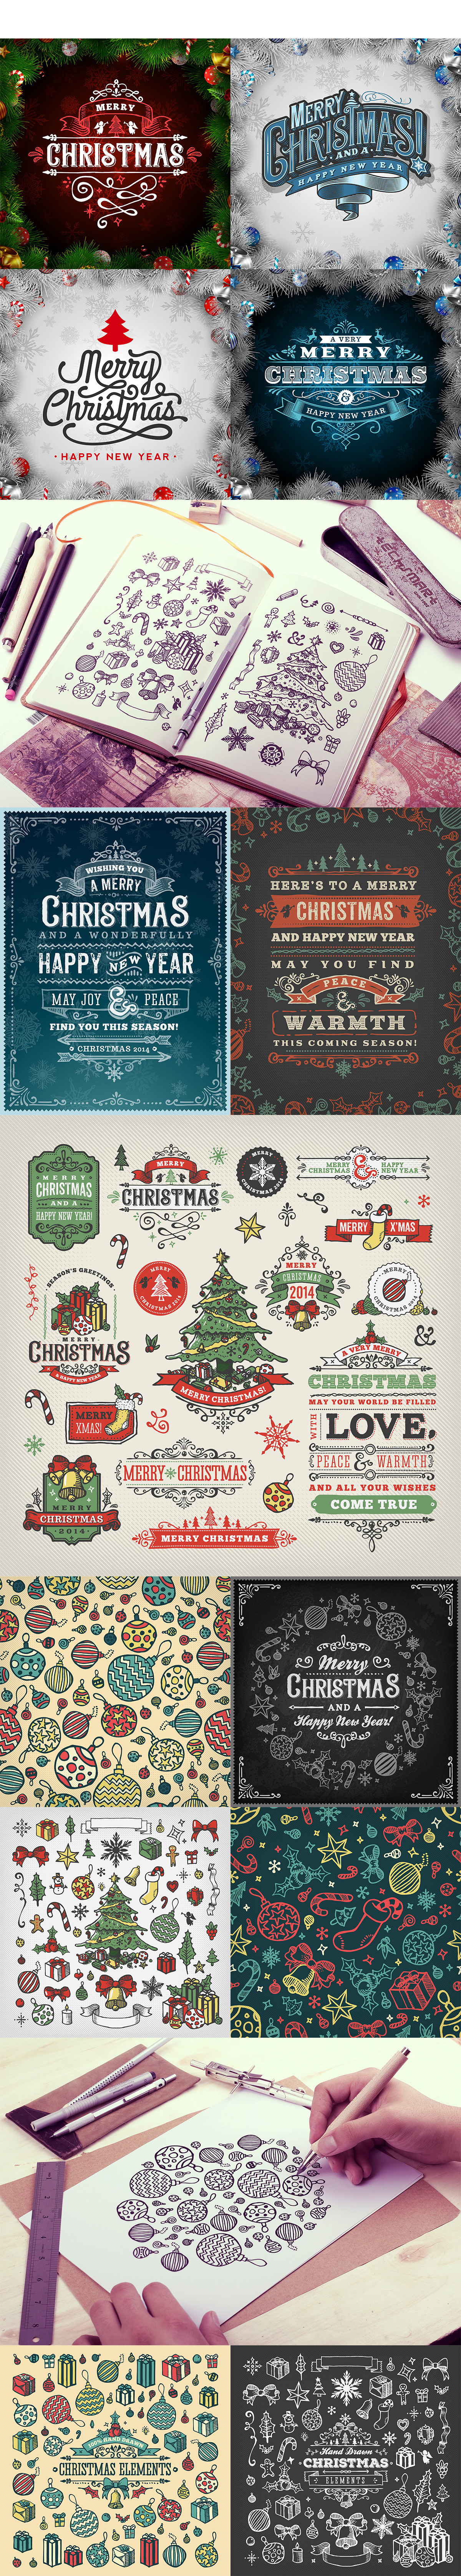 vector stock istock hand drawn Label banner hand crafted royalty free Design Element Christmas blackboard stock illustration doodle vintage Retro